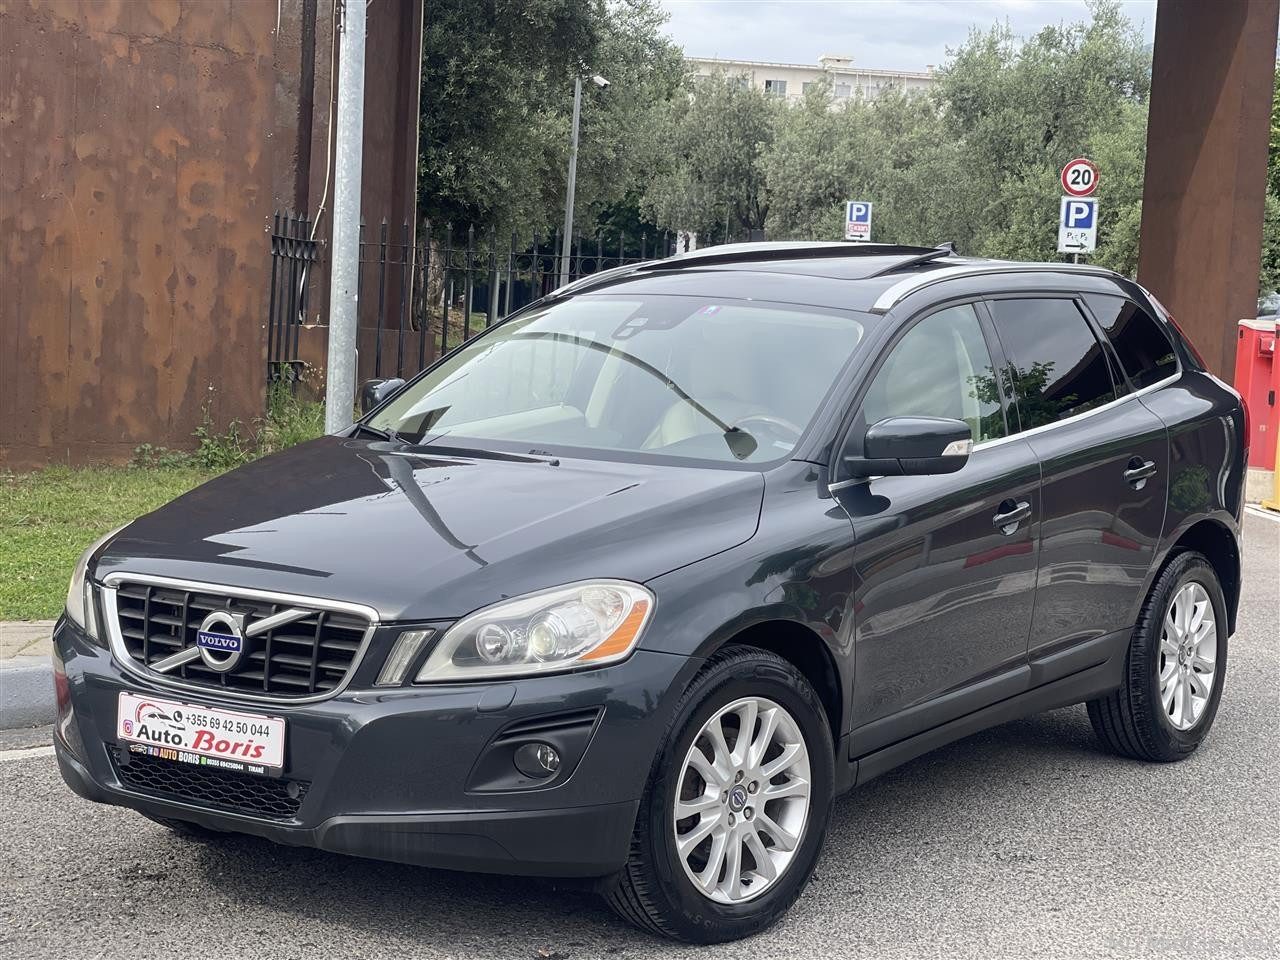 ??Volvo XC60 2.4 D5 Nafte Automat 4X4 Panorama ??